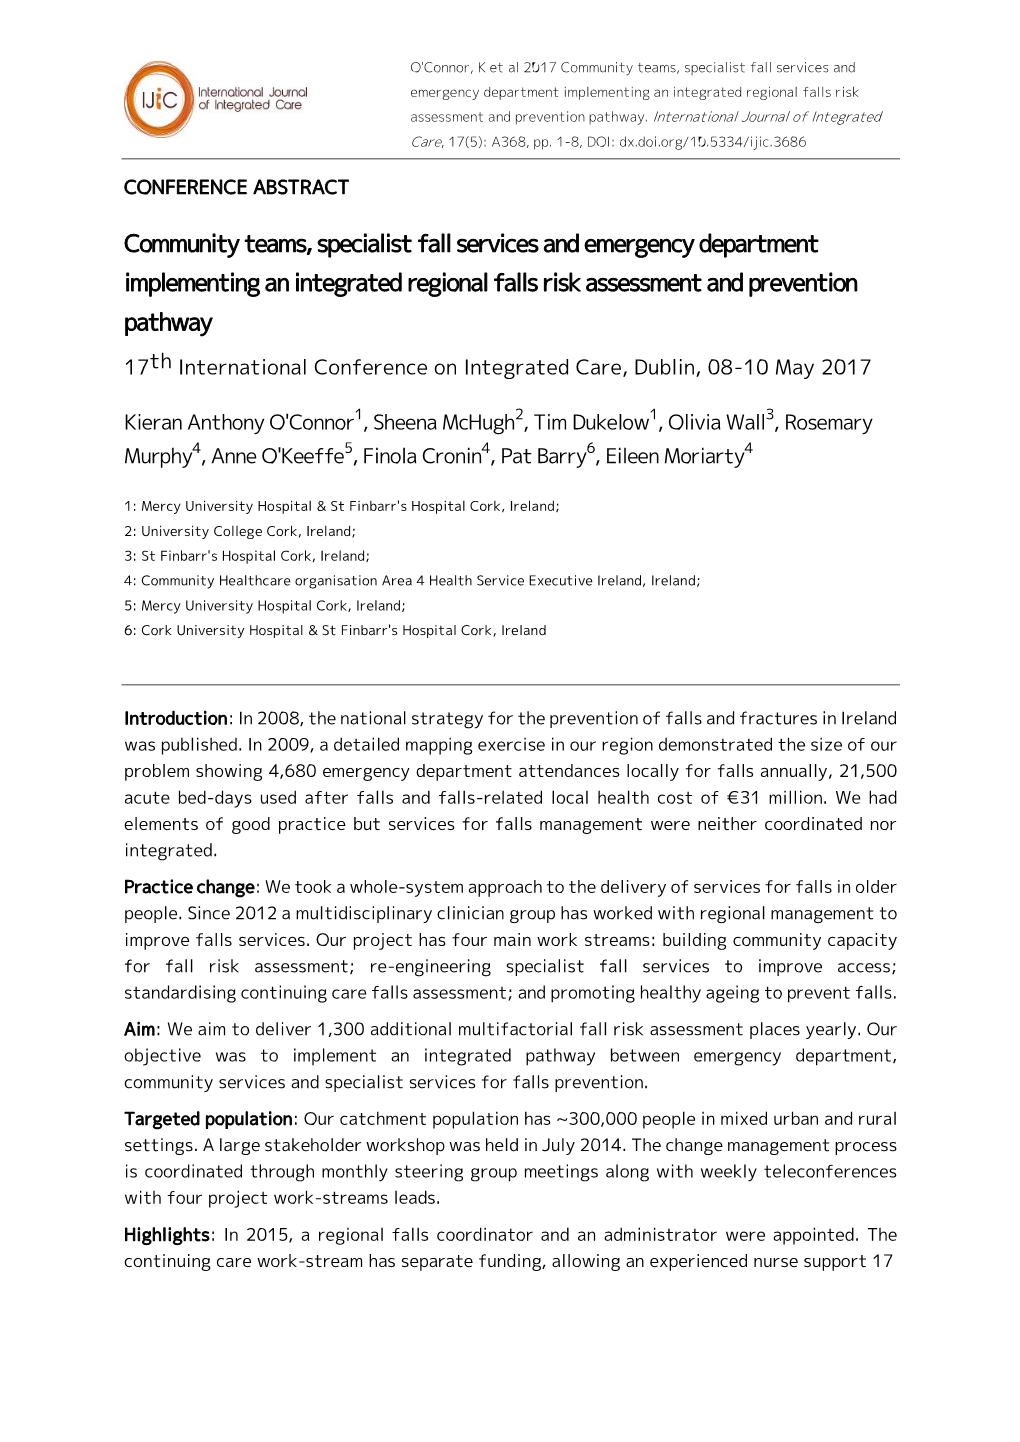 Community Teams, Specialist Fall Services and Emergency Department Implementing an Integrated Regional Falls Risk Assessment and Prevention Pathway